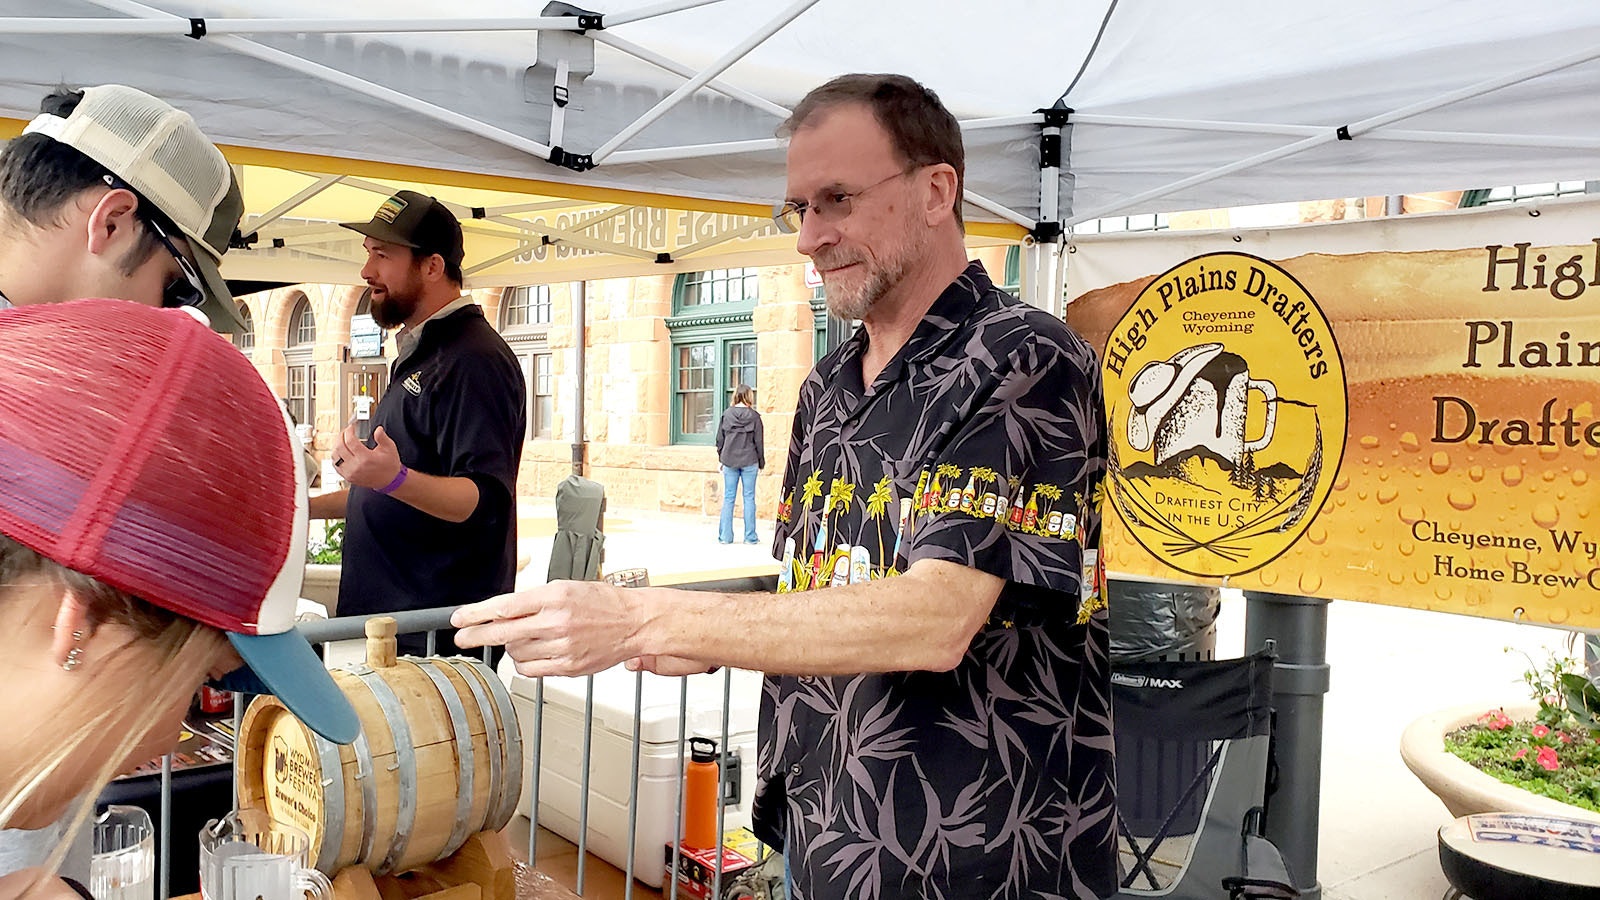 High Plains Drafters is all about the love of craft brewing and brought many interesting beers to the Wyoming Brewing Festival held recently in Cheyenne.